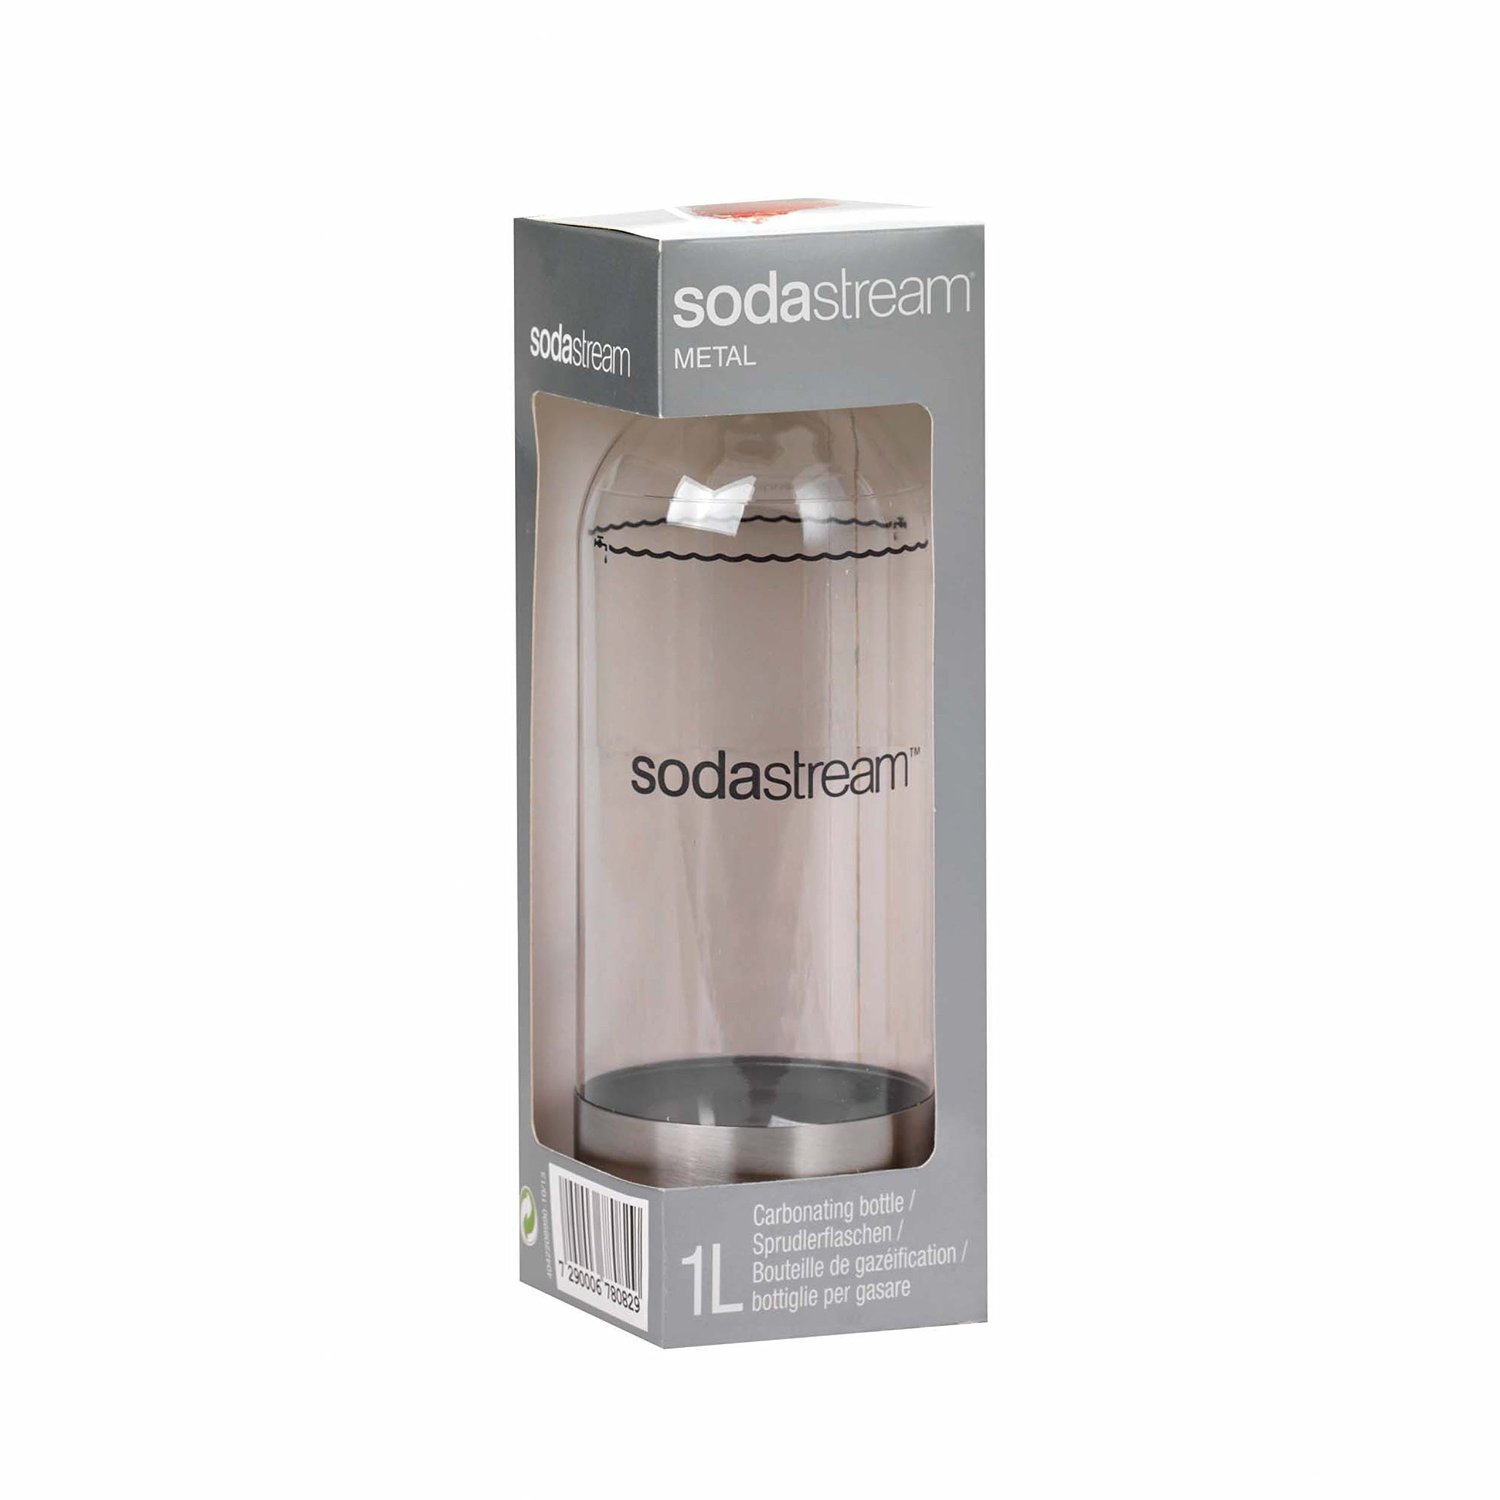 Sodastream 1L Carbonating Bottle with Stainless Steel Accents